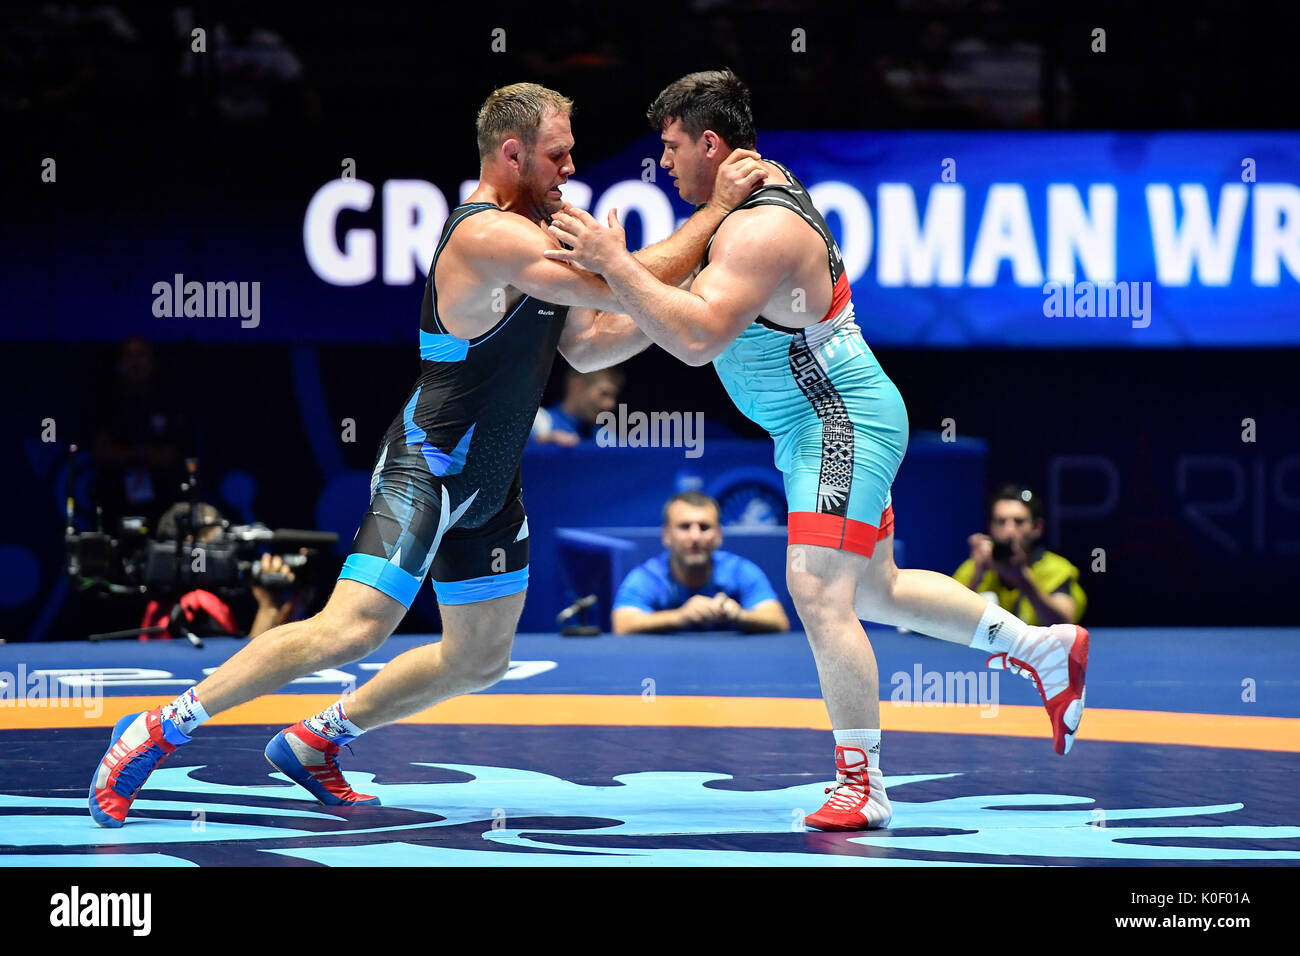 Paris, France. 22nd Aug, 2017. Riza Kayaalp (R) of Turkey competes with  Heiki Nabi of Estonia during the final match of men's 130kg Greece-Roman  wrestling of the FILA World Wrestling Championships in